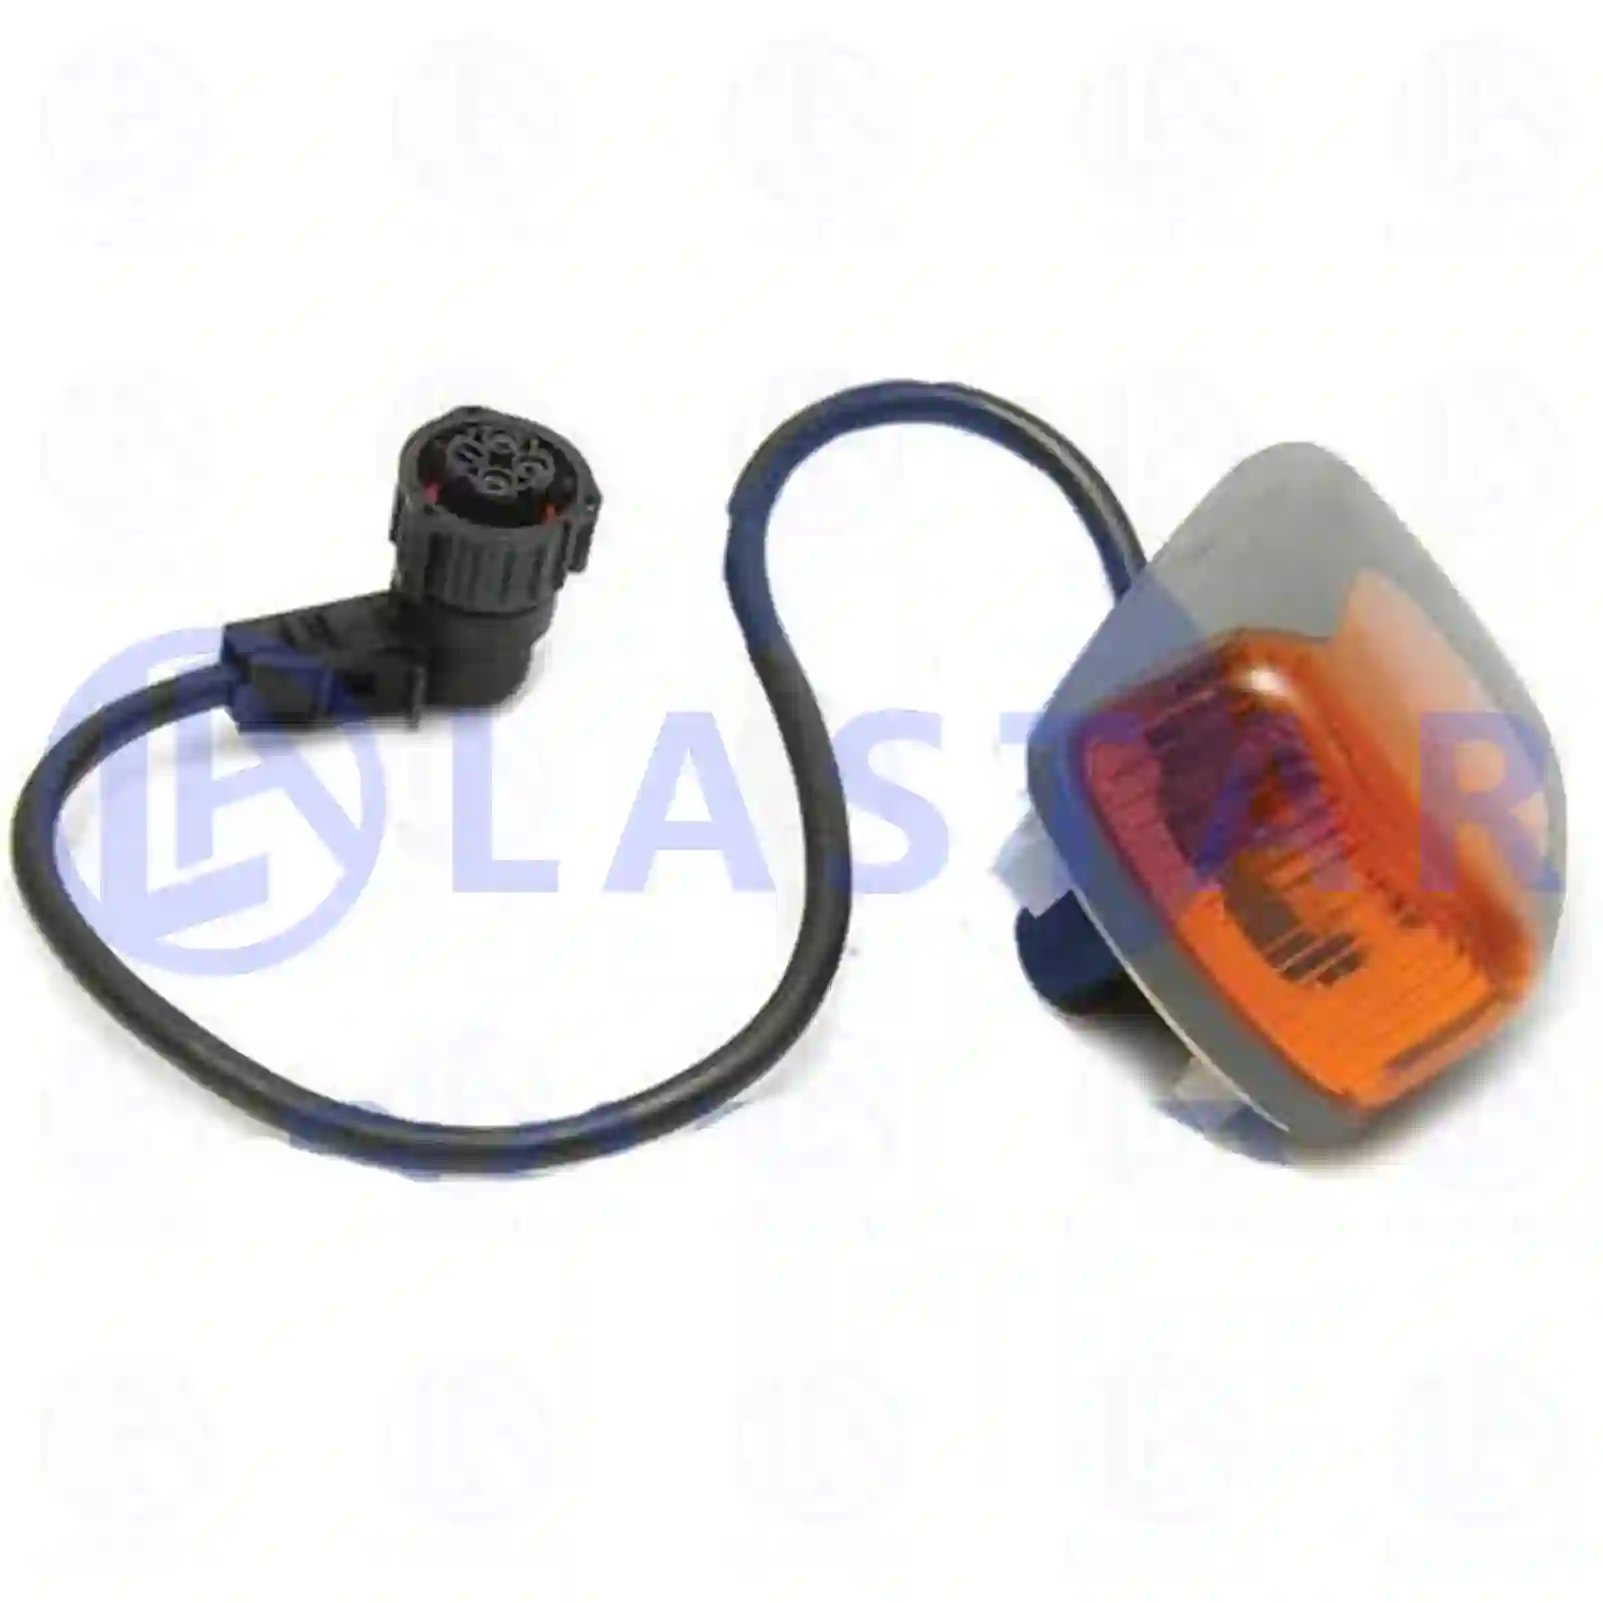 Turn signal lamp, lateral, with bulb, 77711804, 9408200221, ZG21167-0008, ||  77711804 Lastar Spare Part | Truck Spare Parts, Auotomotive Spare Parts Turn signal lamp, lateral, with bulb, 77711804, 9408200221, ZG21167-0008, ||  77711804 Lastar Spare Part | Truck Spare Parts, Auotomotive Spare Parts